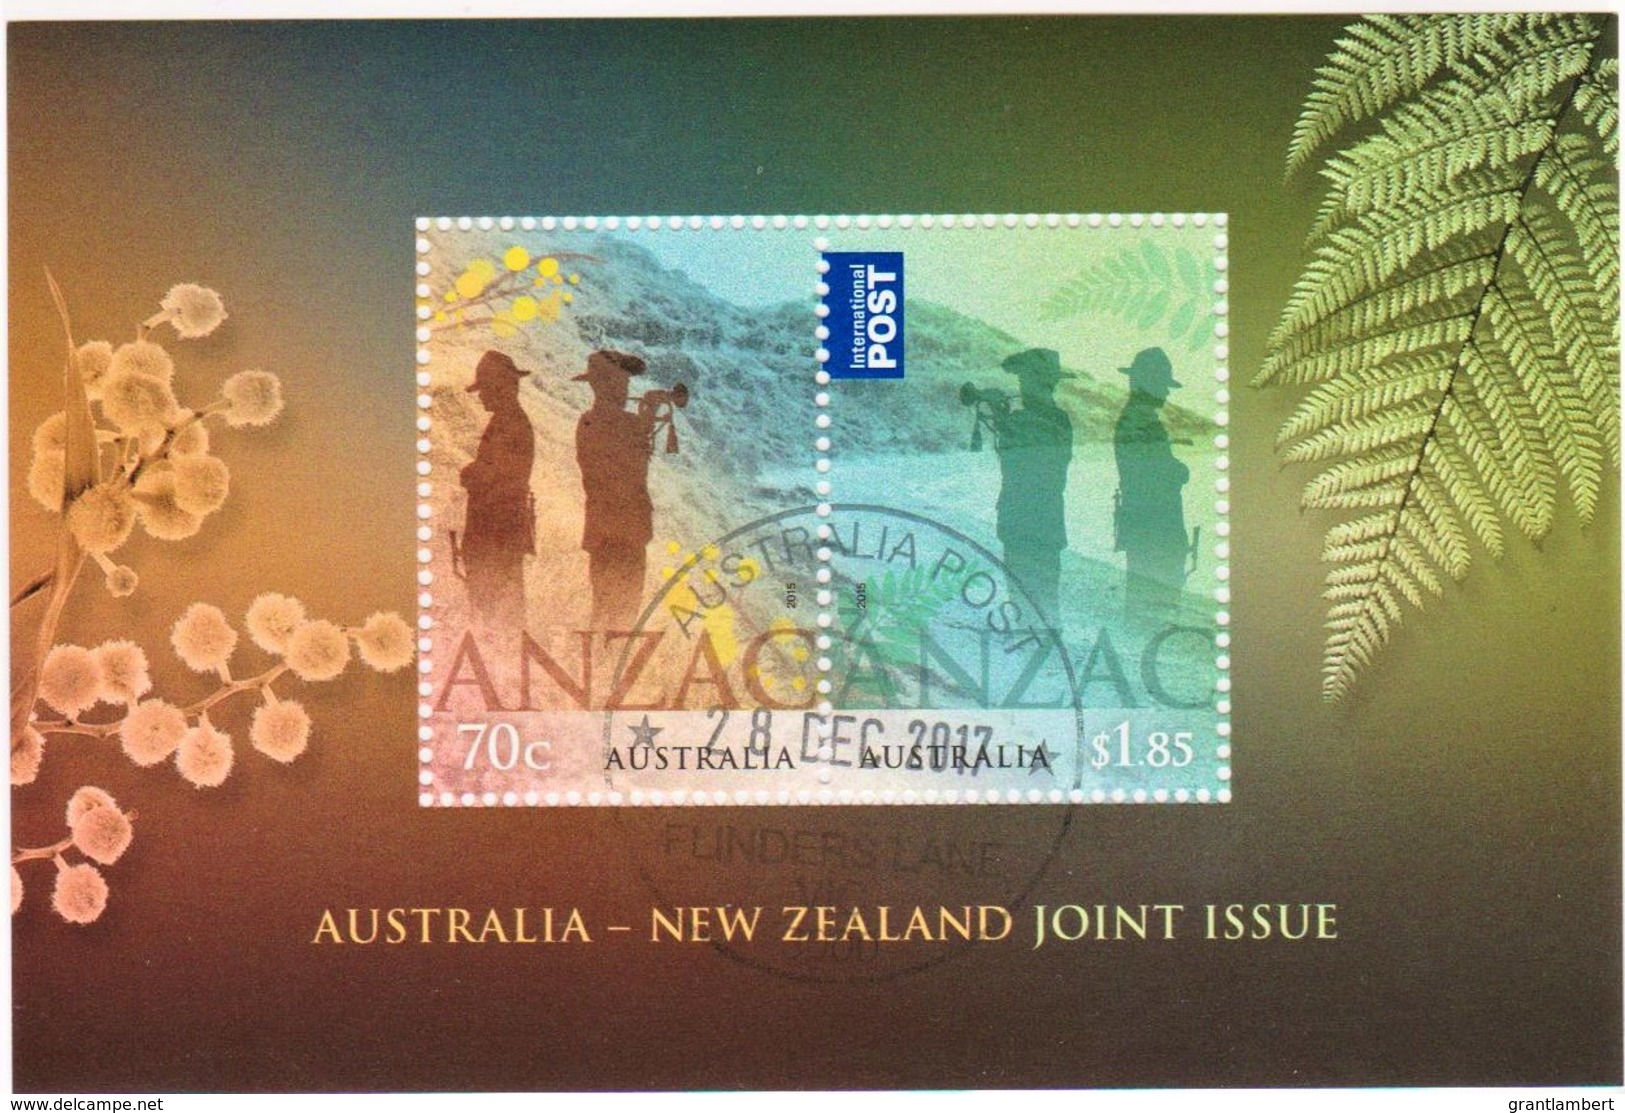 Australia 2015 ANZAC Day Joint Issue New Zealand Minisheet CTO - - Used Stamps